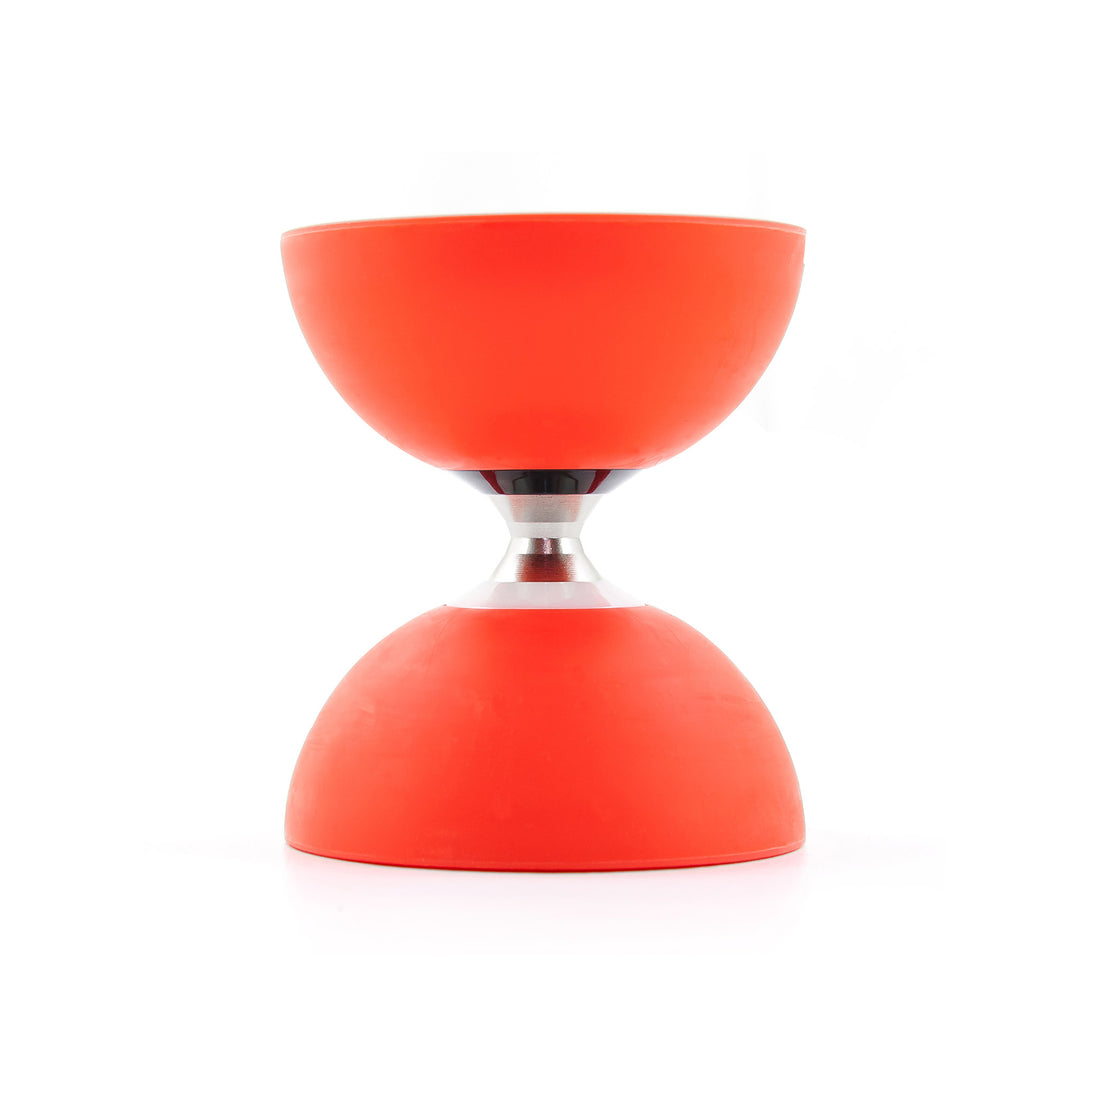 Red Cyclone diabolo standing